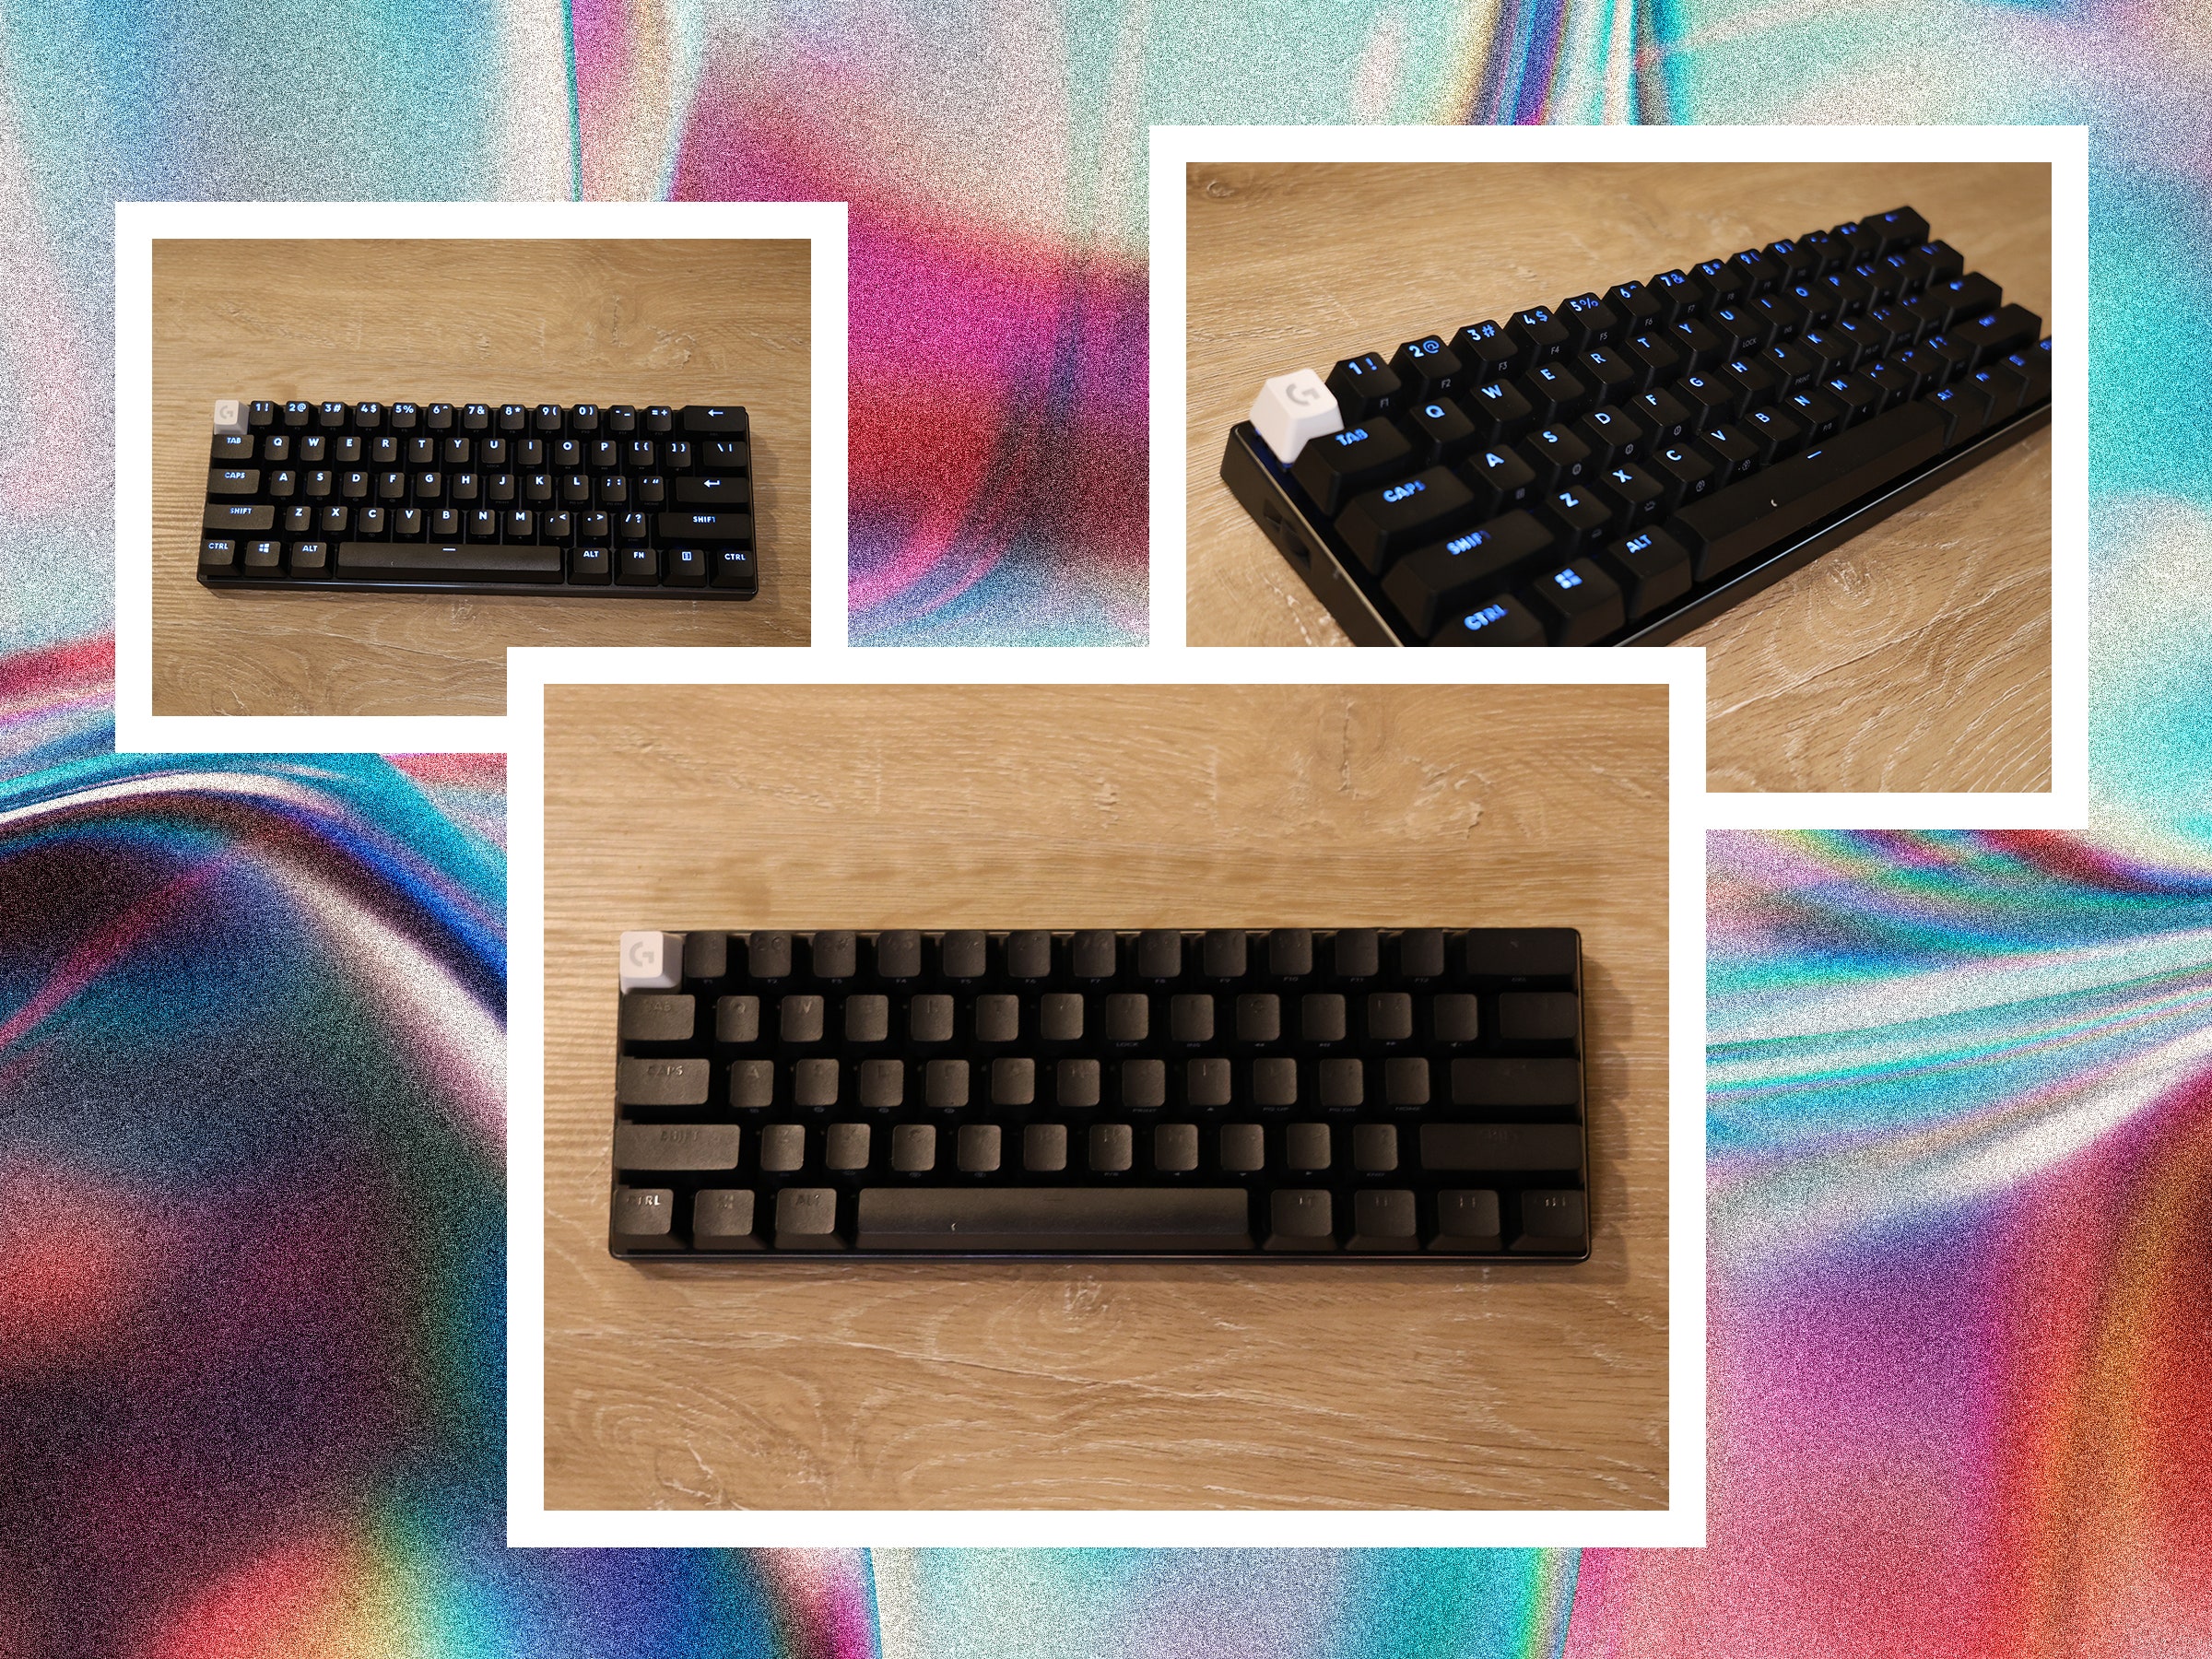 Different views of black computer keyboard with illuminated keys and a single all white key in the topleft sitting on a...